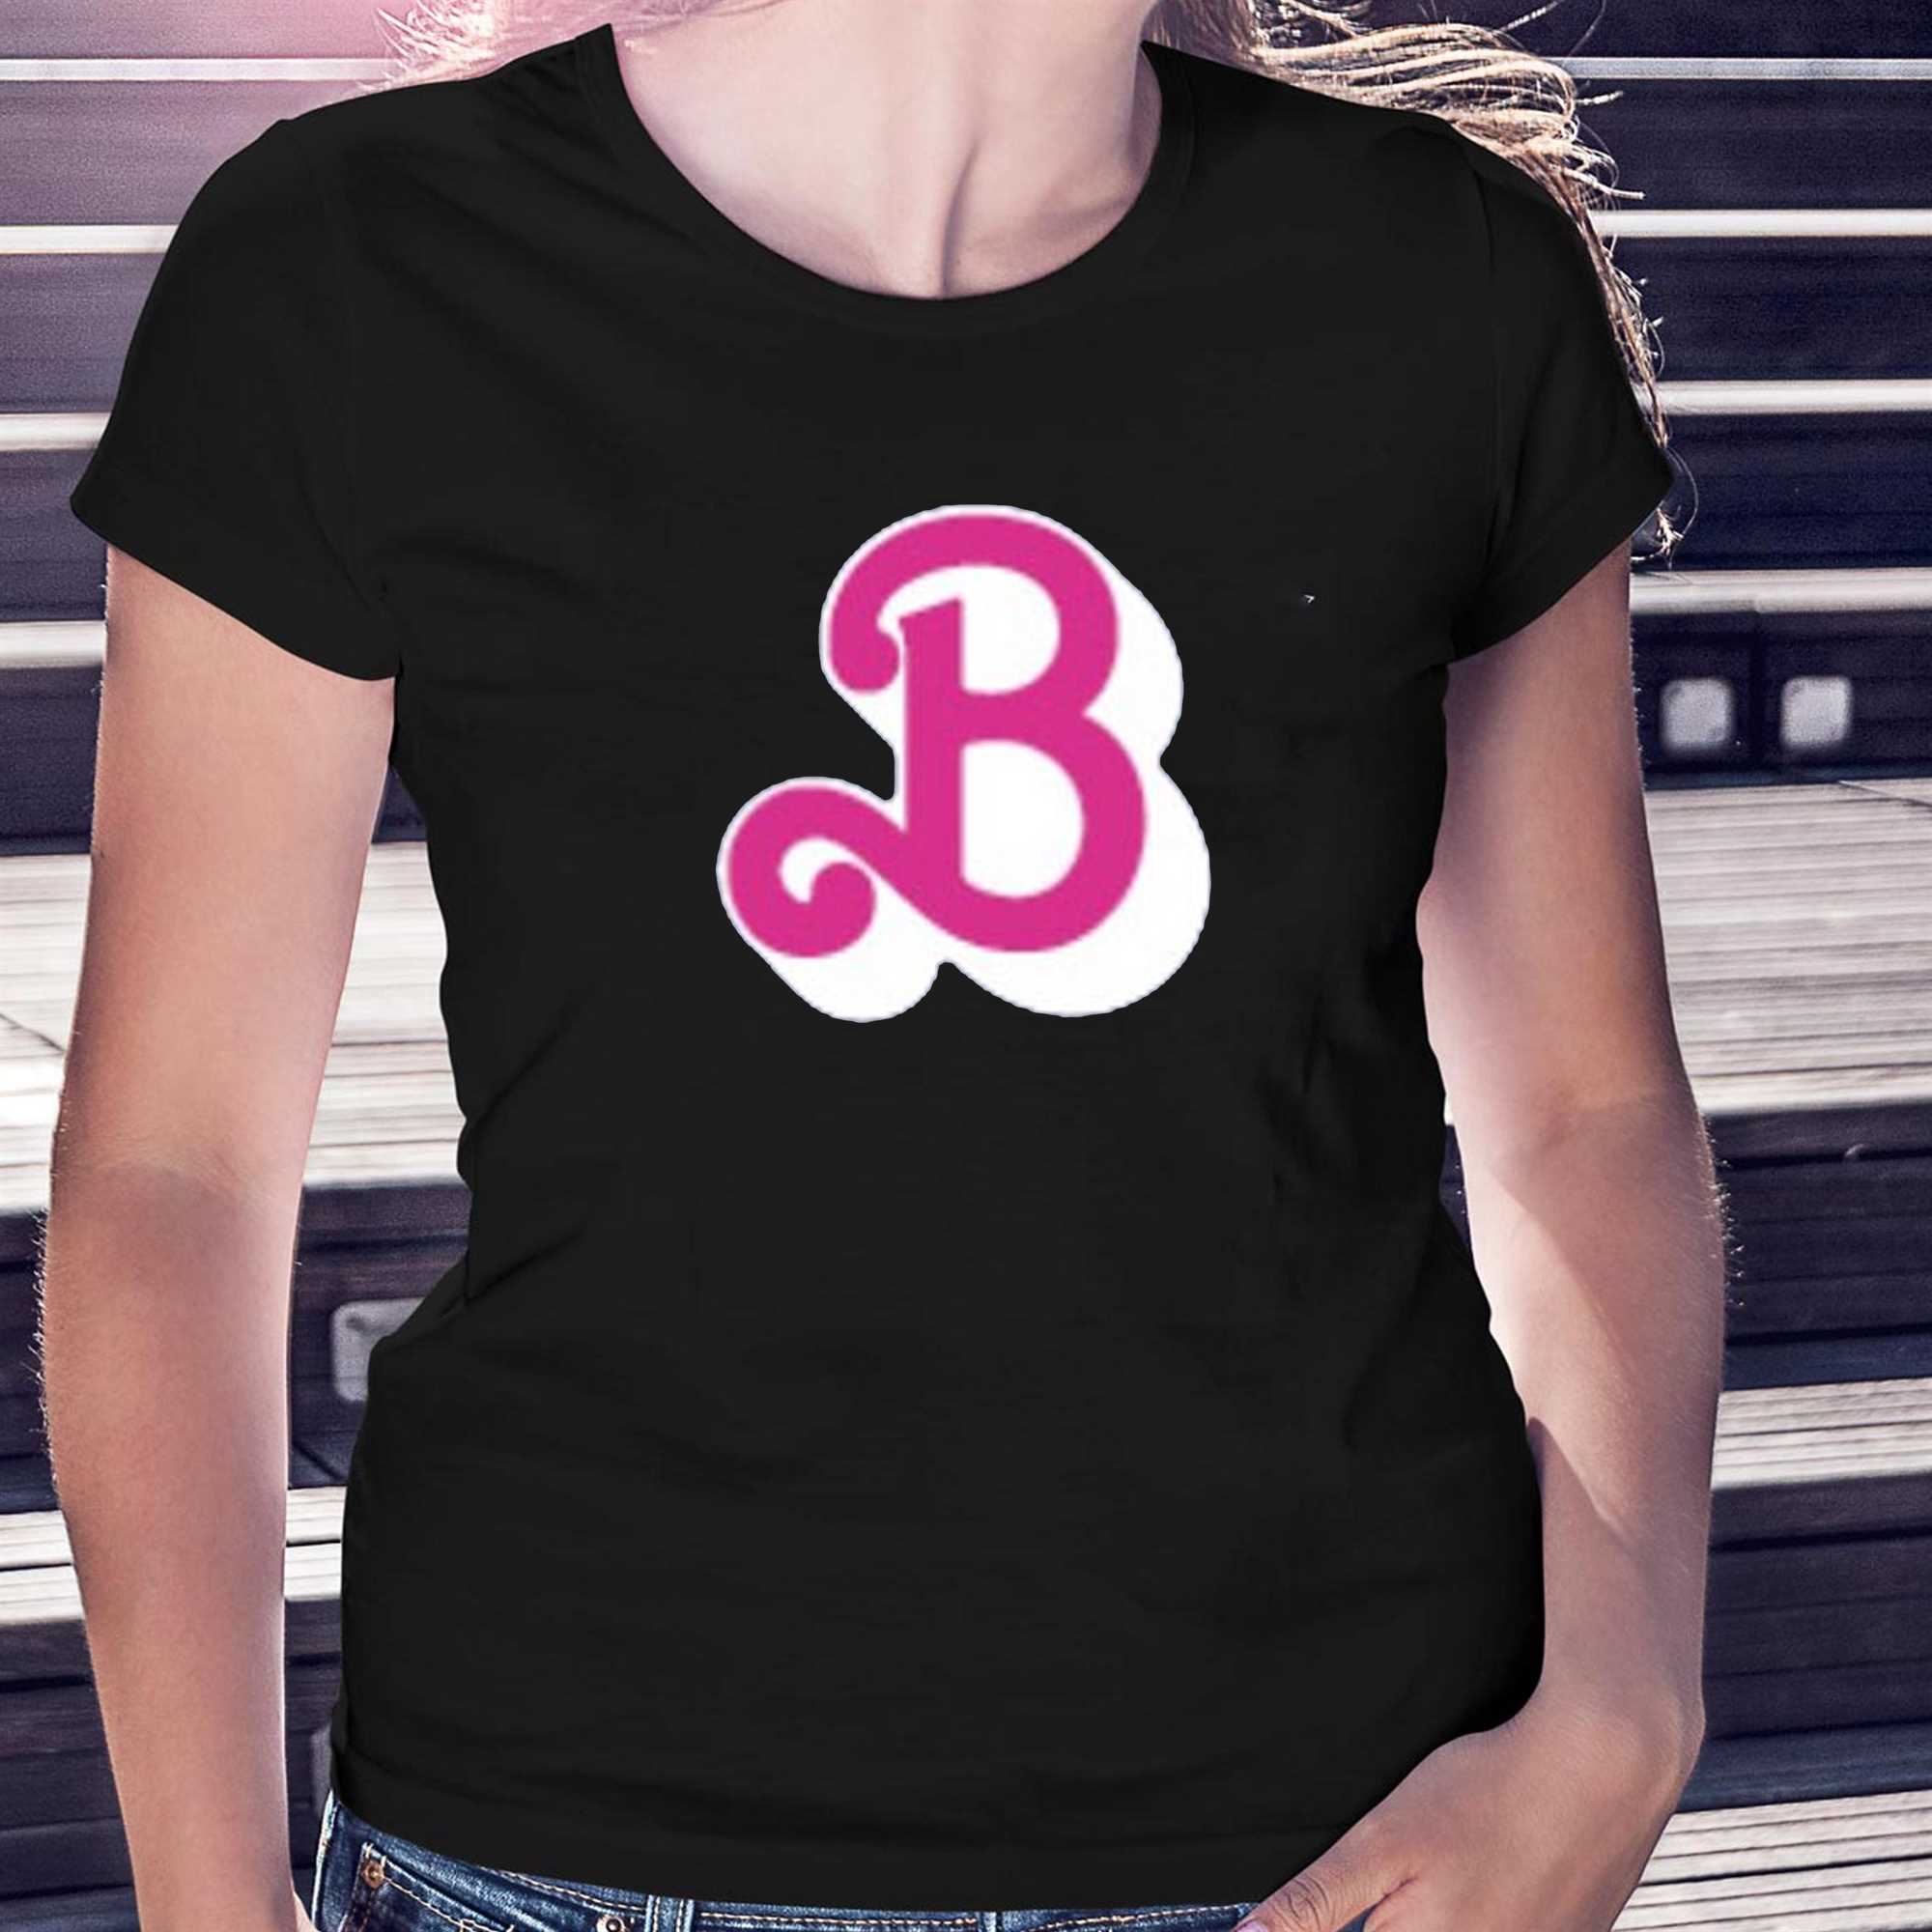 Official Barbie Boston Red Sox T Shirt - WBMTEE